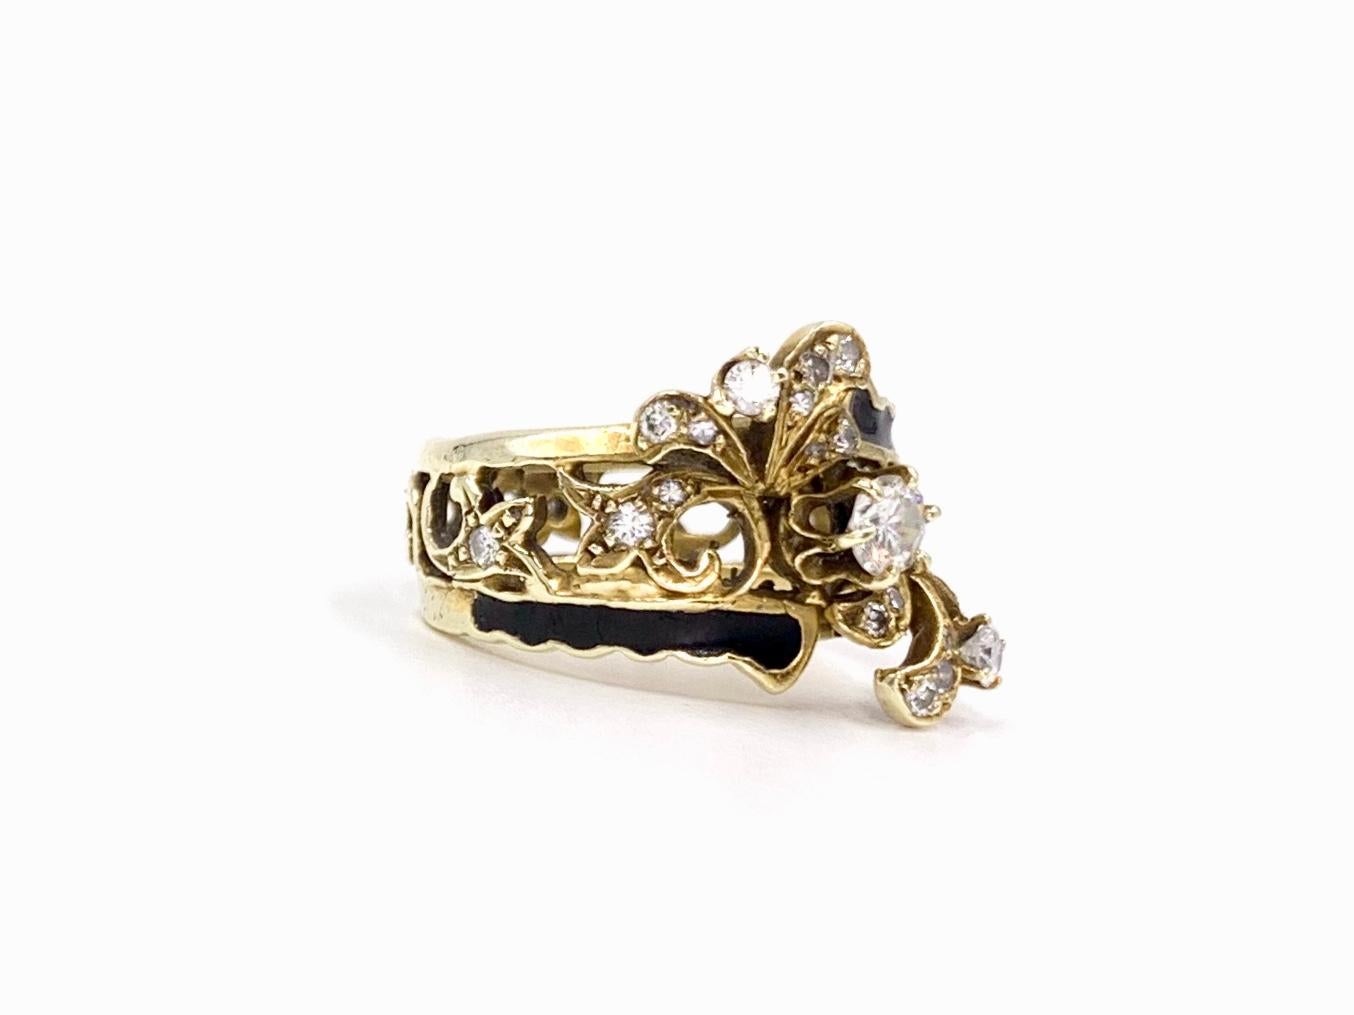 An elegantly designed Victorian inspired 14 karat yellow gold filigree ring with incredible detail and design. The ring features a total of 26 round brilliant diamonds at approximately .60 carats total weight. Ring features hand painted black